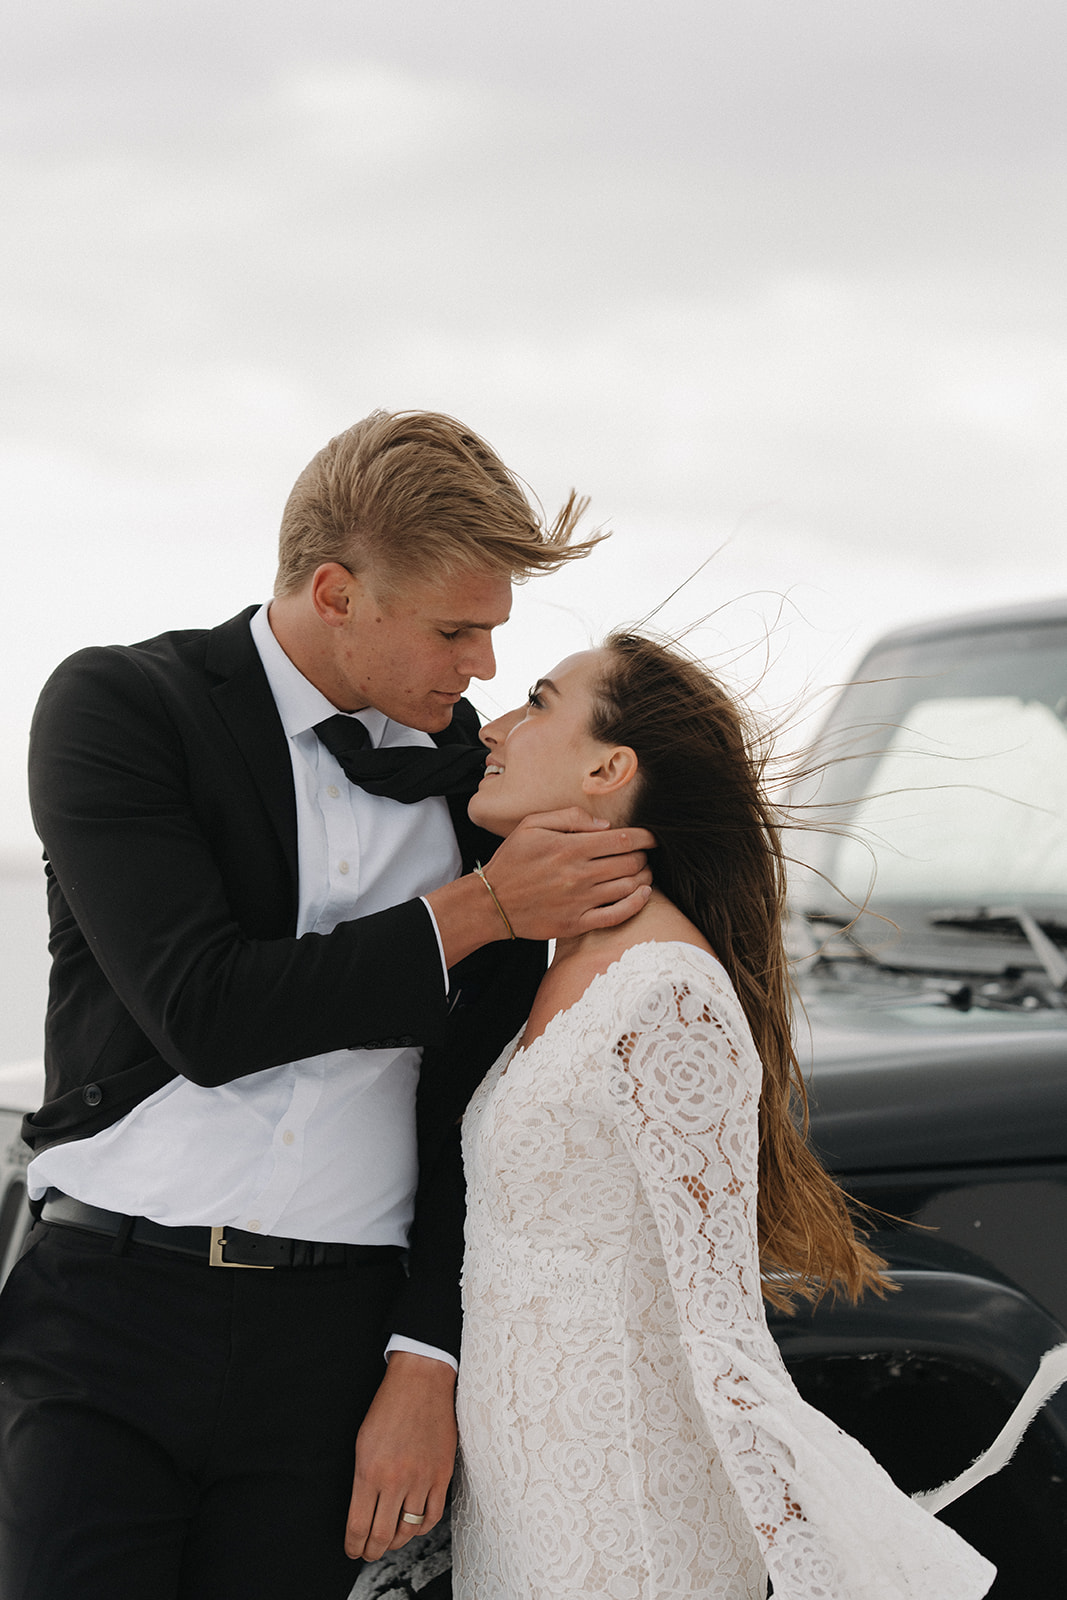 Newlyweds lean against a black jeep while going in for a kiss on a windy day